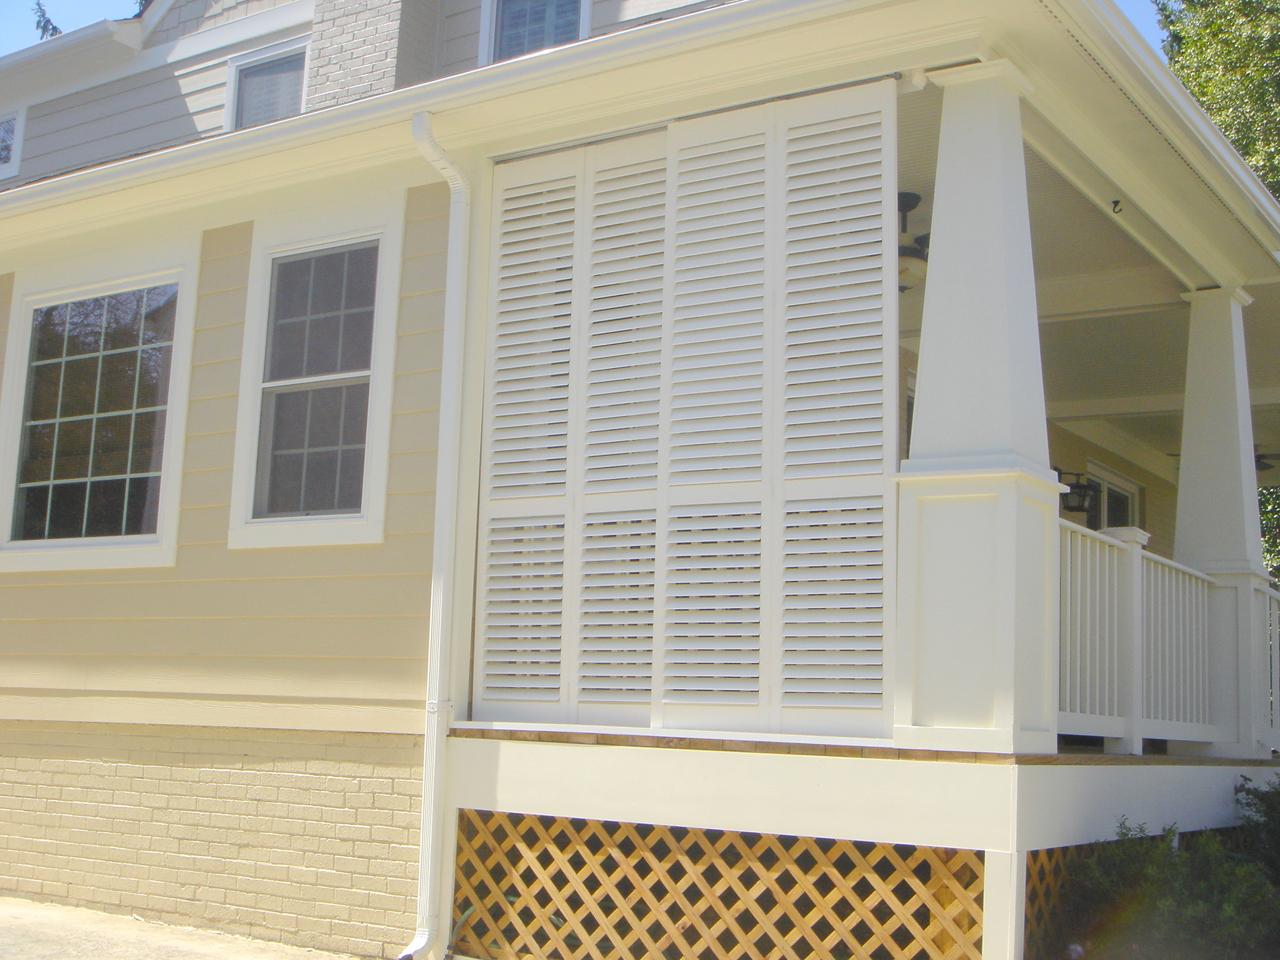 Outside view of porch with Louverwood shutters